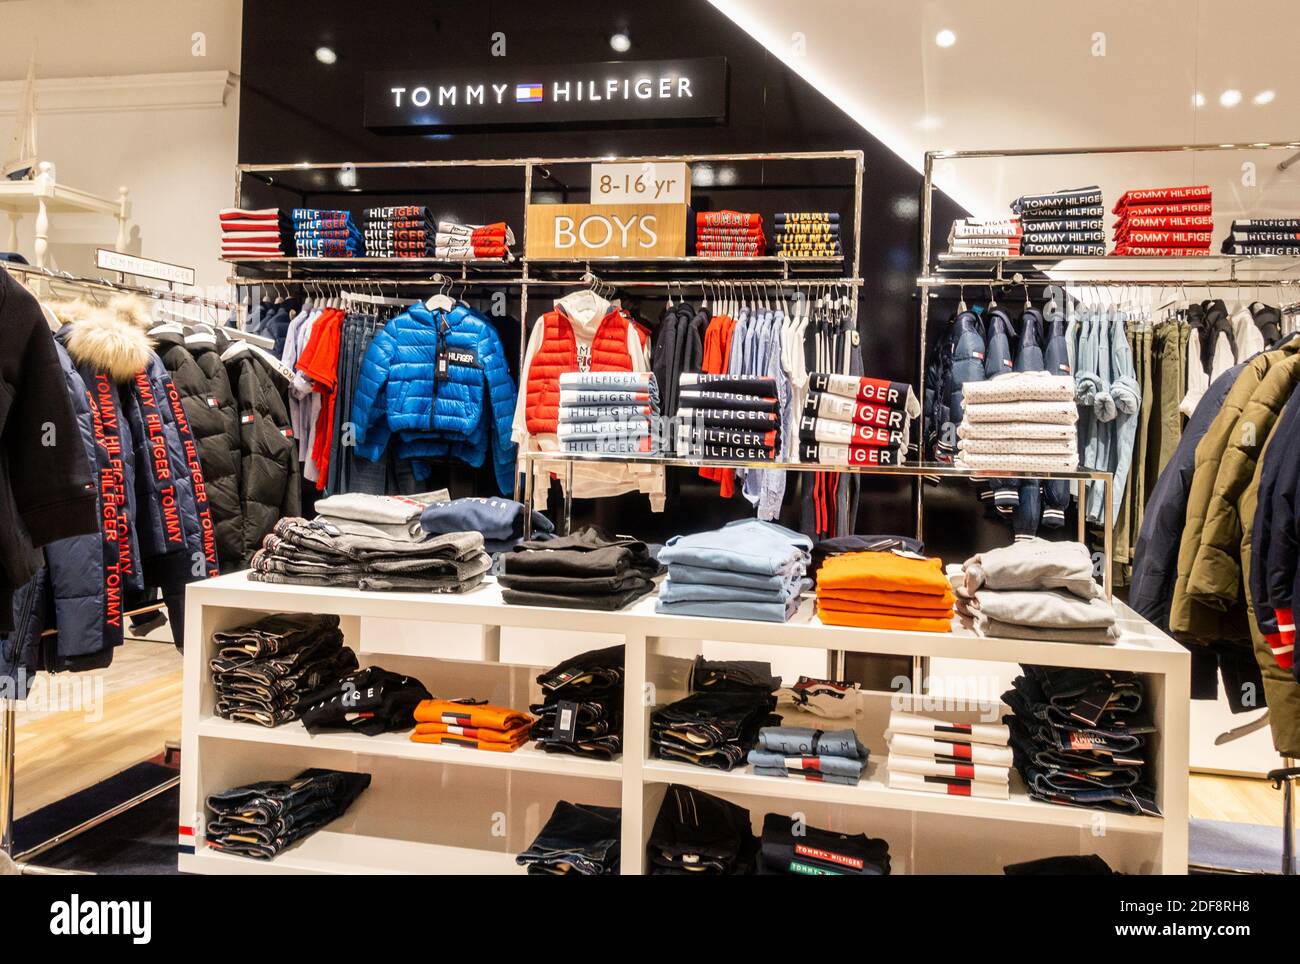 Tommy Hilfiger kids clothing store display Stock Photo - Alamy